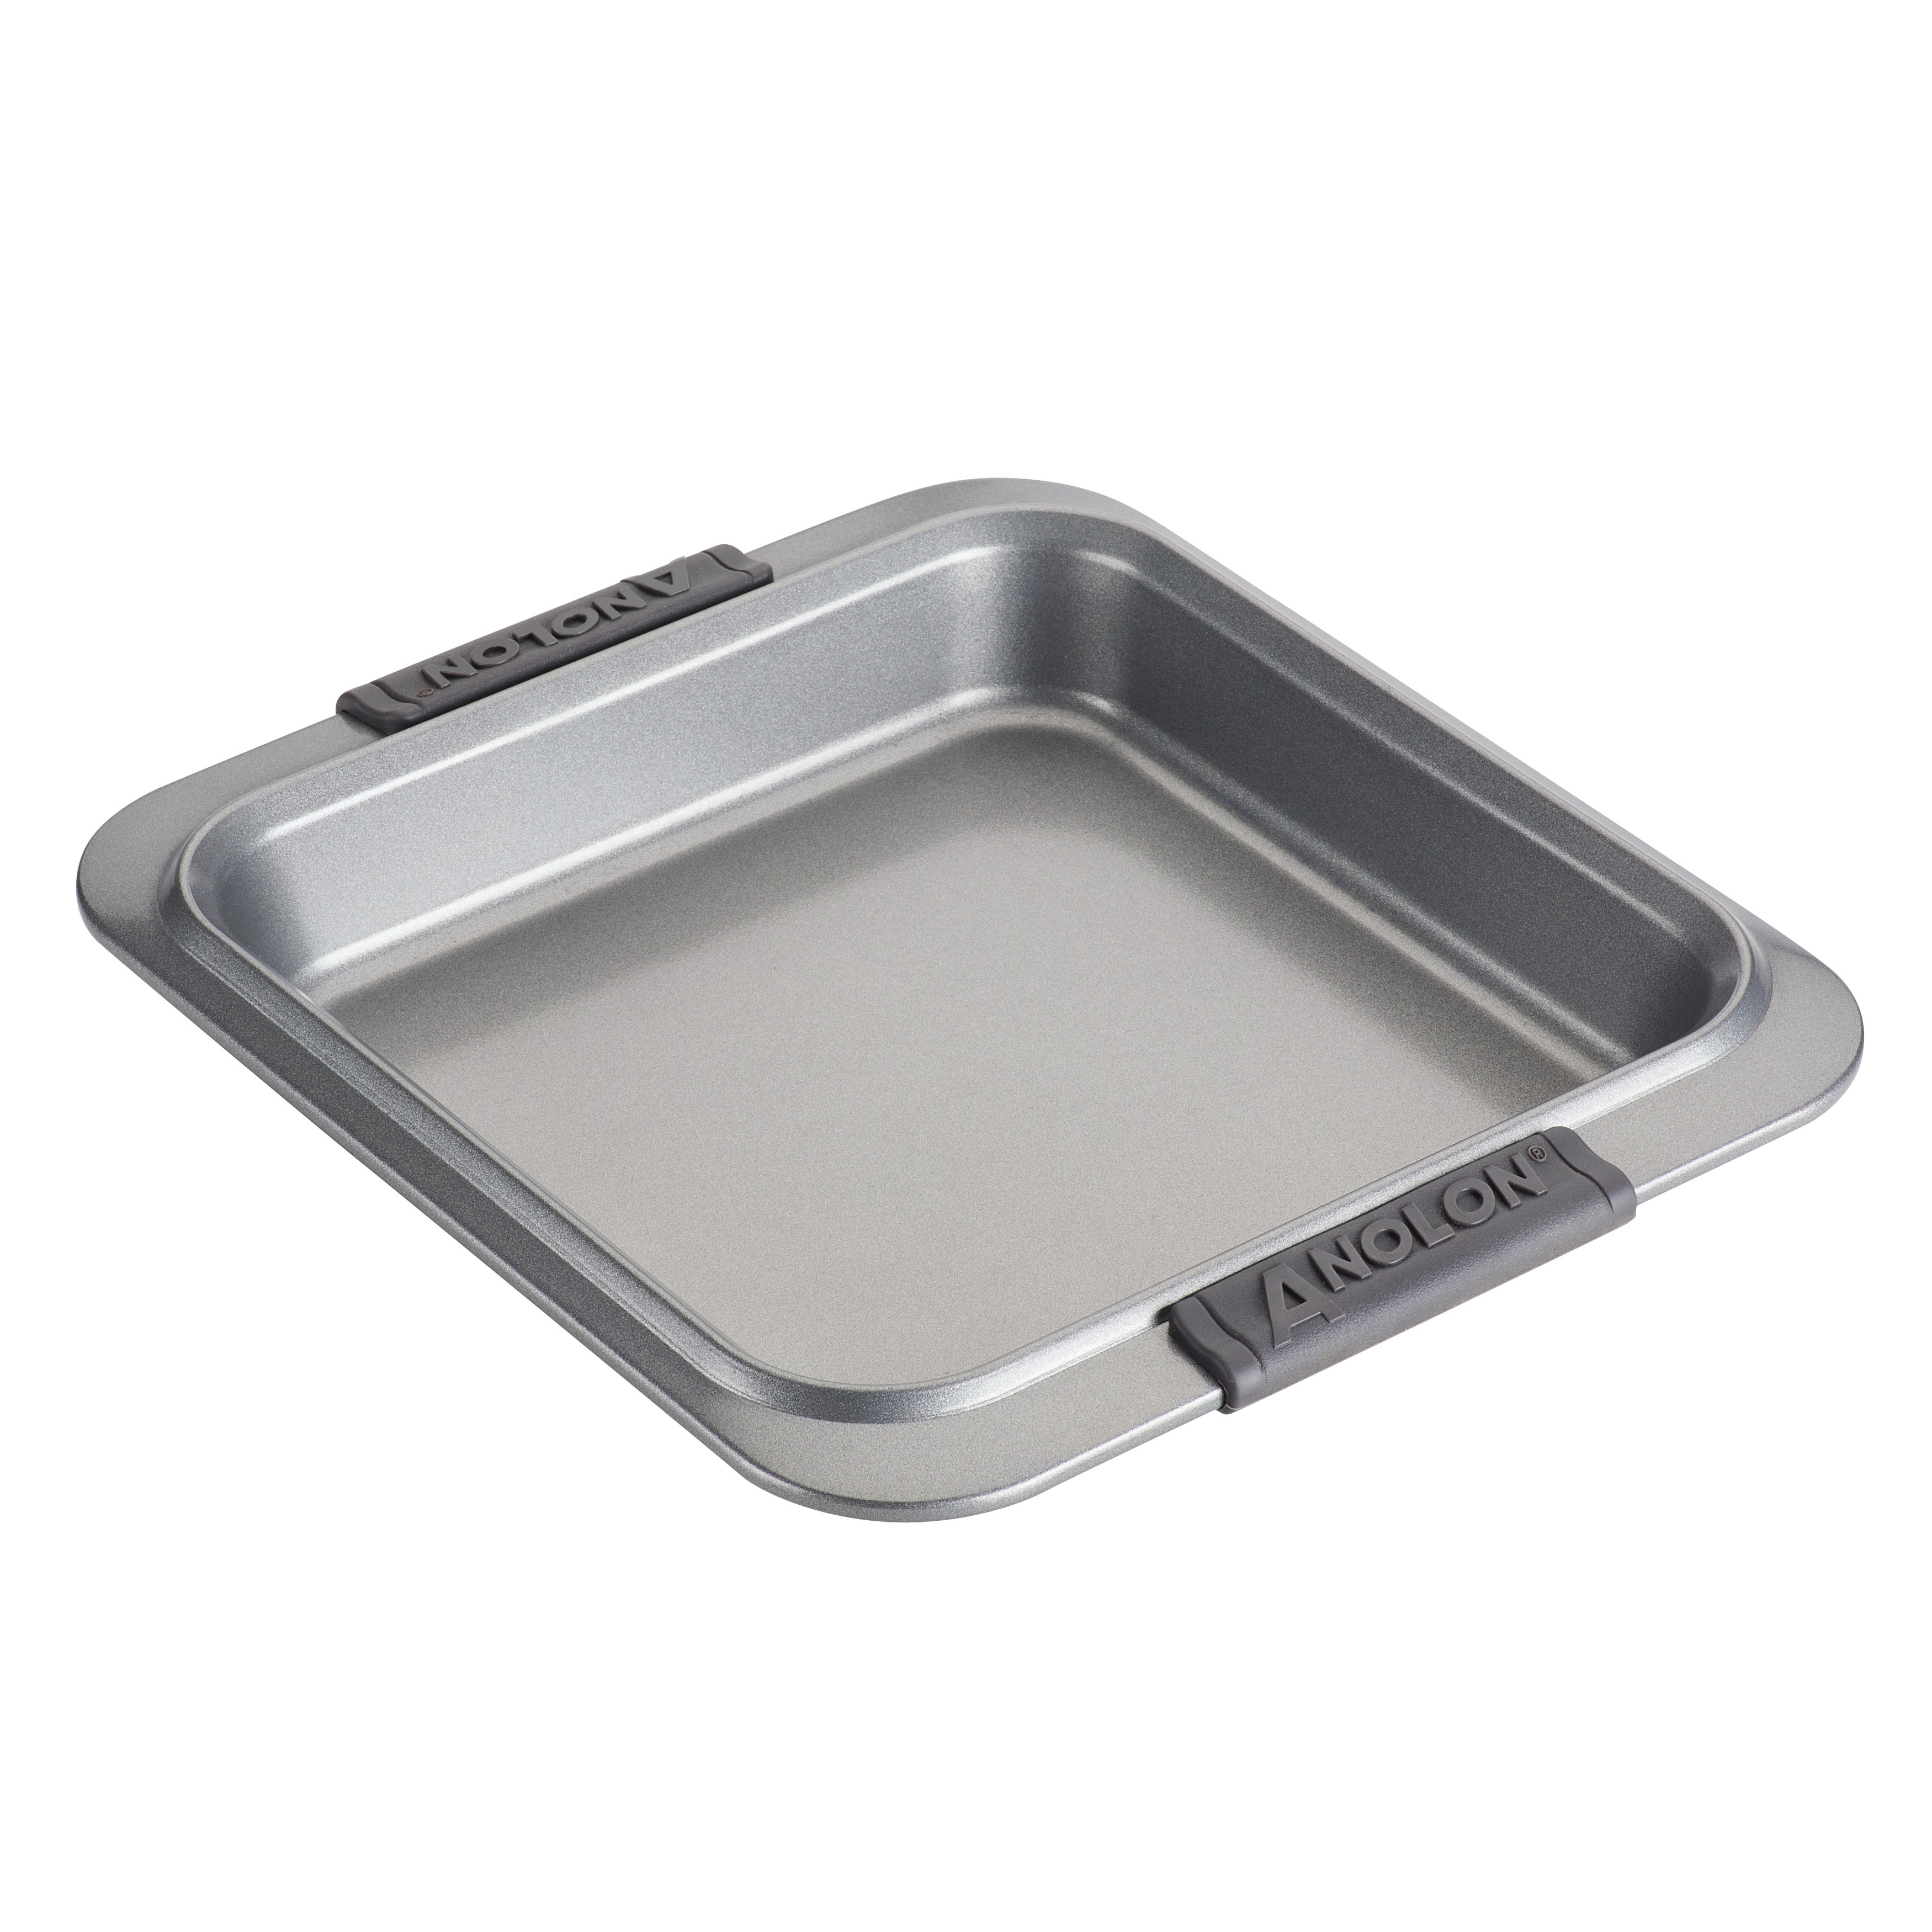 https://ak1.ostkcdn.com/images/products/is/images/direct/6dea0bb12e7010d251e6fea56770fbaadae3bfe1/Anolon-Advanced-Bakeware-Nonstick-Square-Cake-Pan%2C-9-Inch-x-9-Inch%2C-Gray.jpg